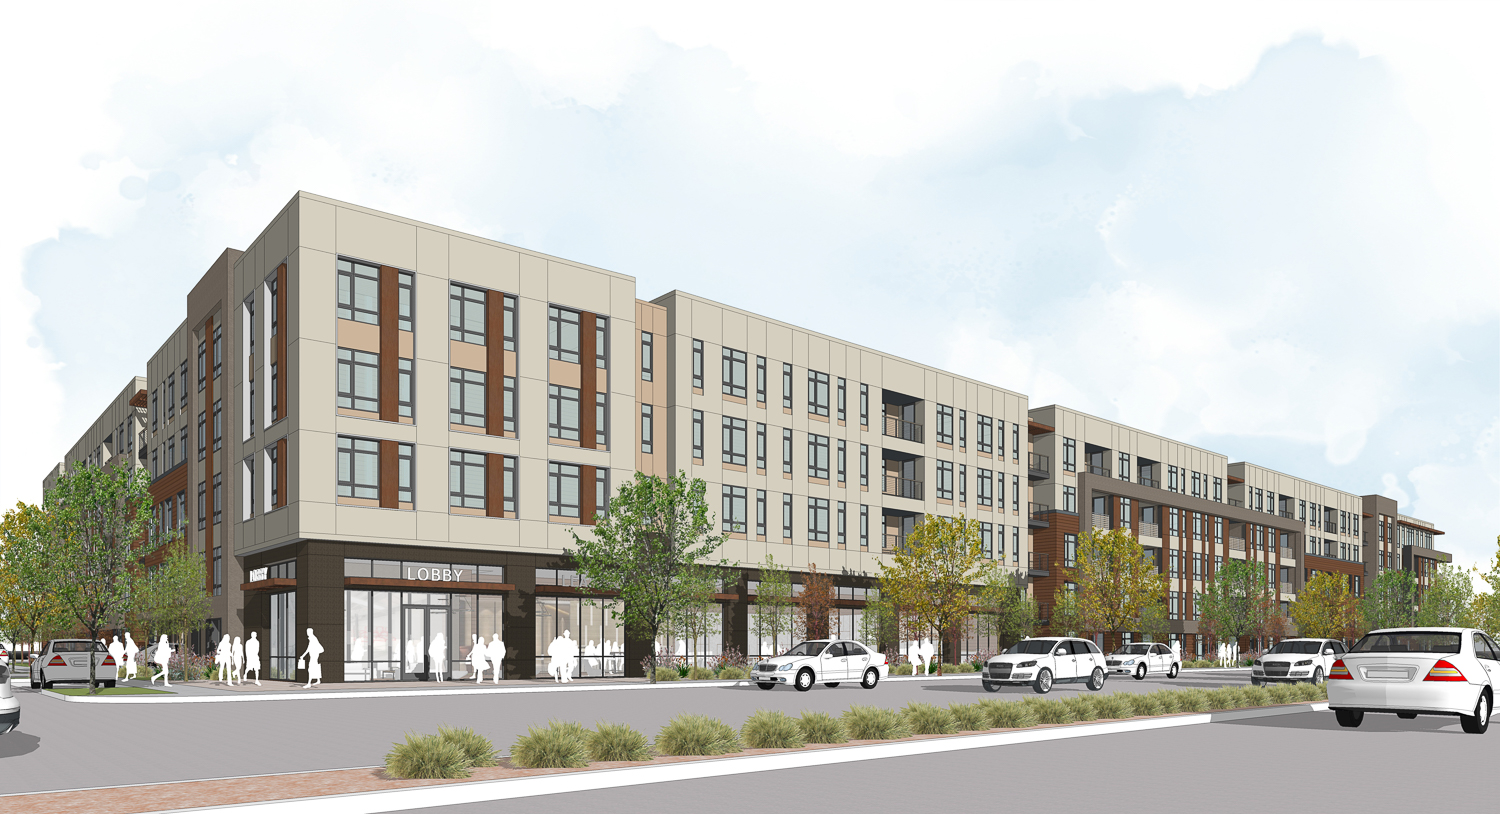 University Station apartment complex overlooking El Camino Real, rendering by KTGY